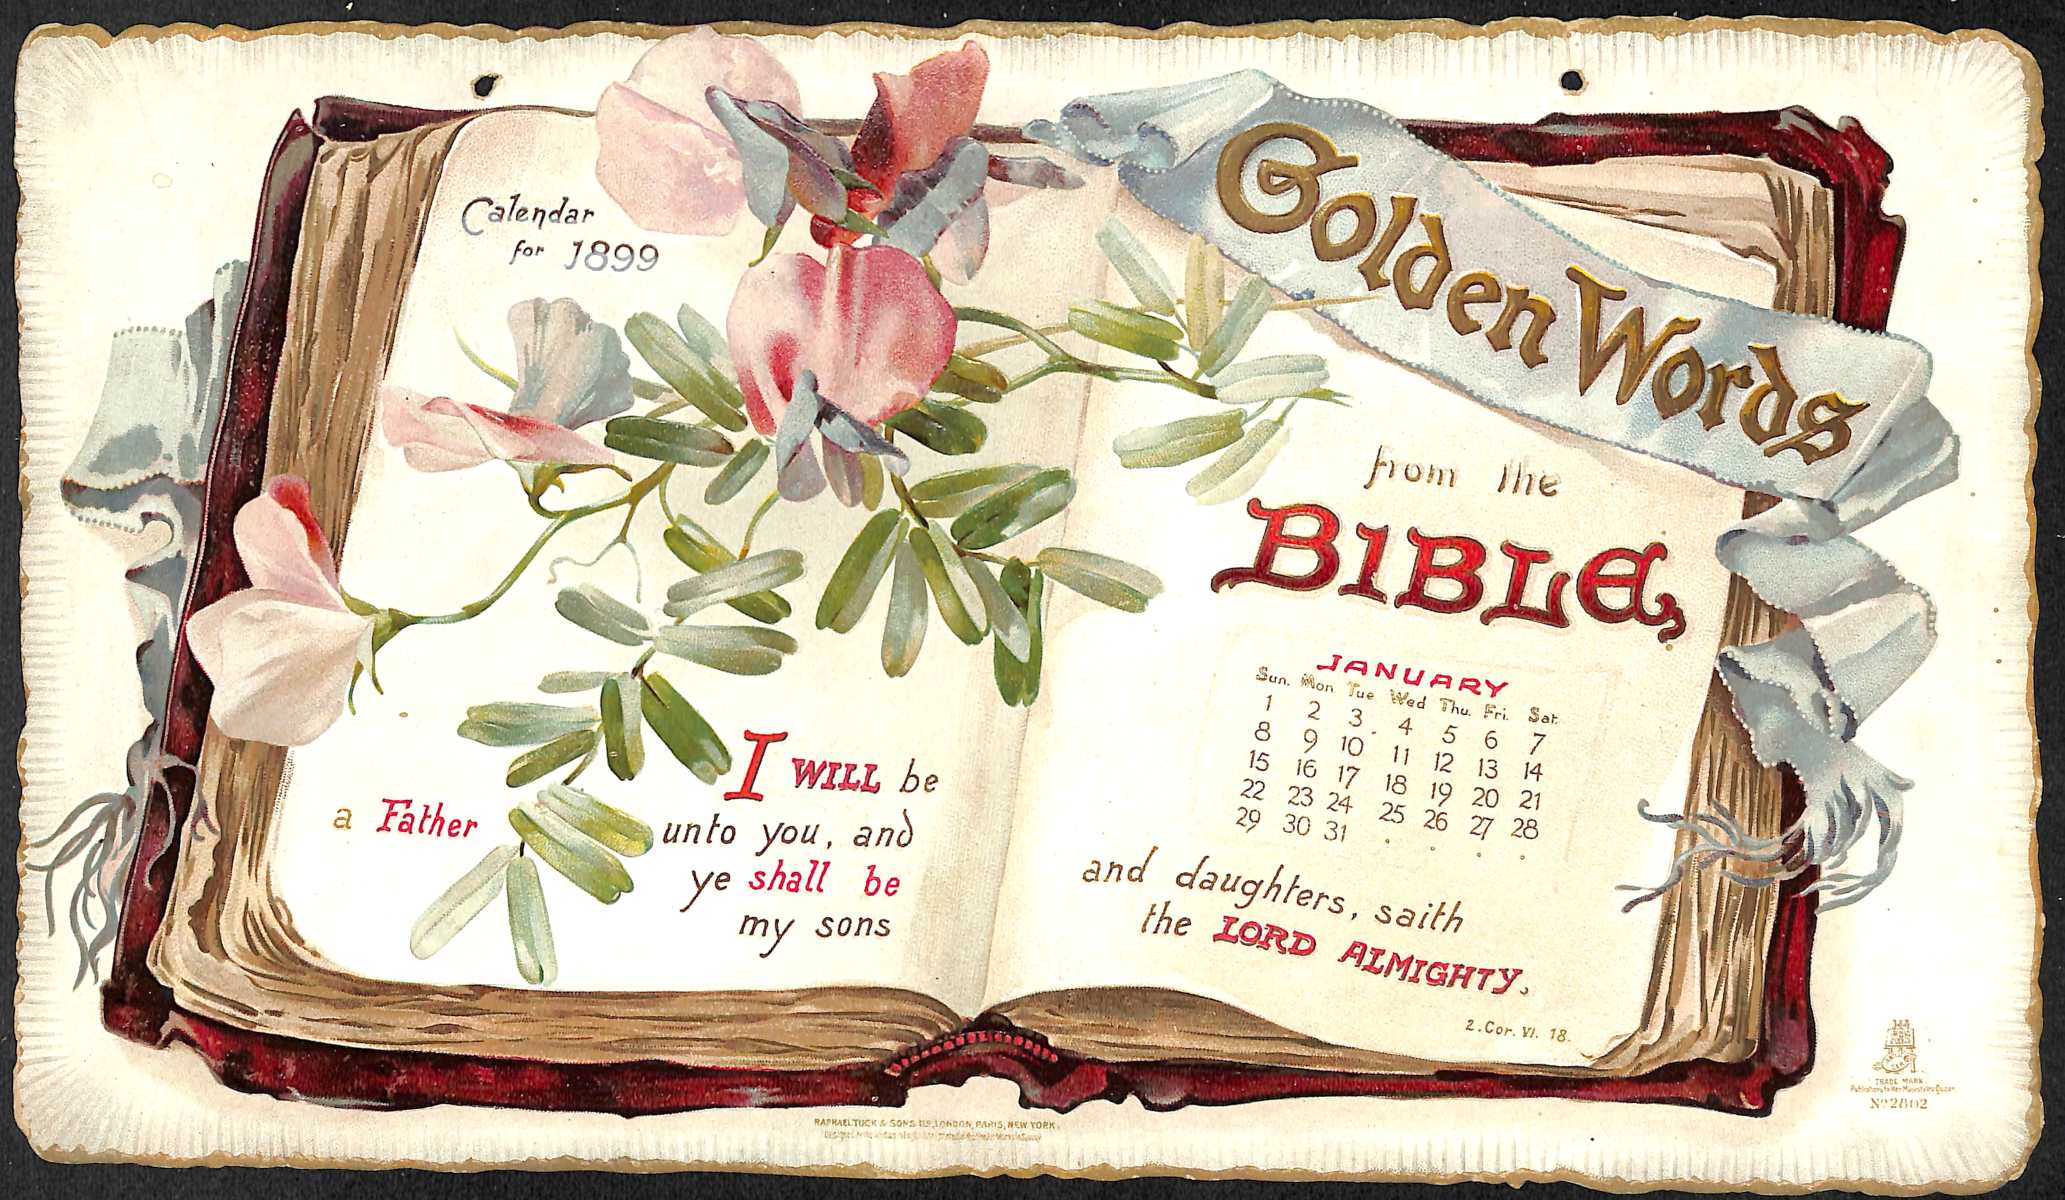 The Mysterious Month Of Abib Revealed In The Bible Calendar!